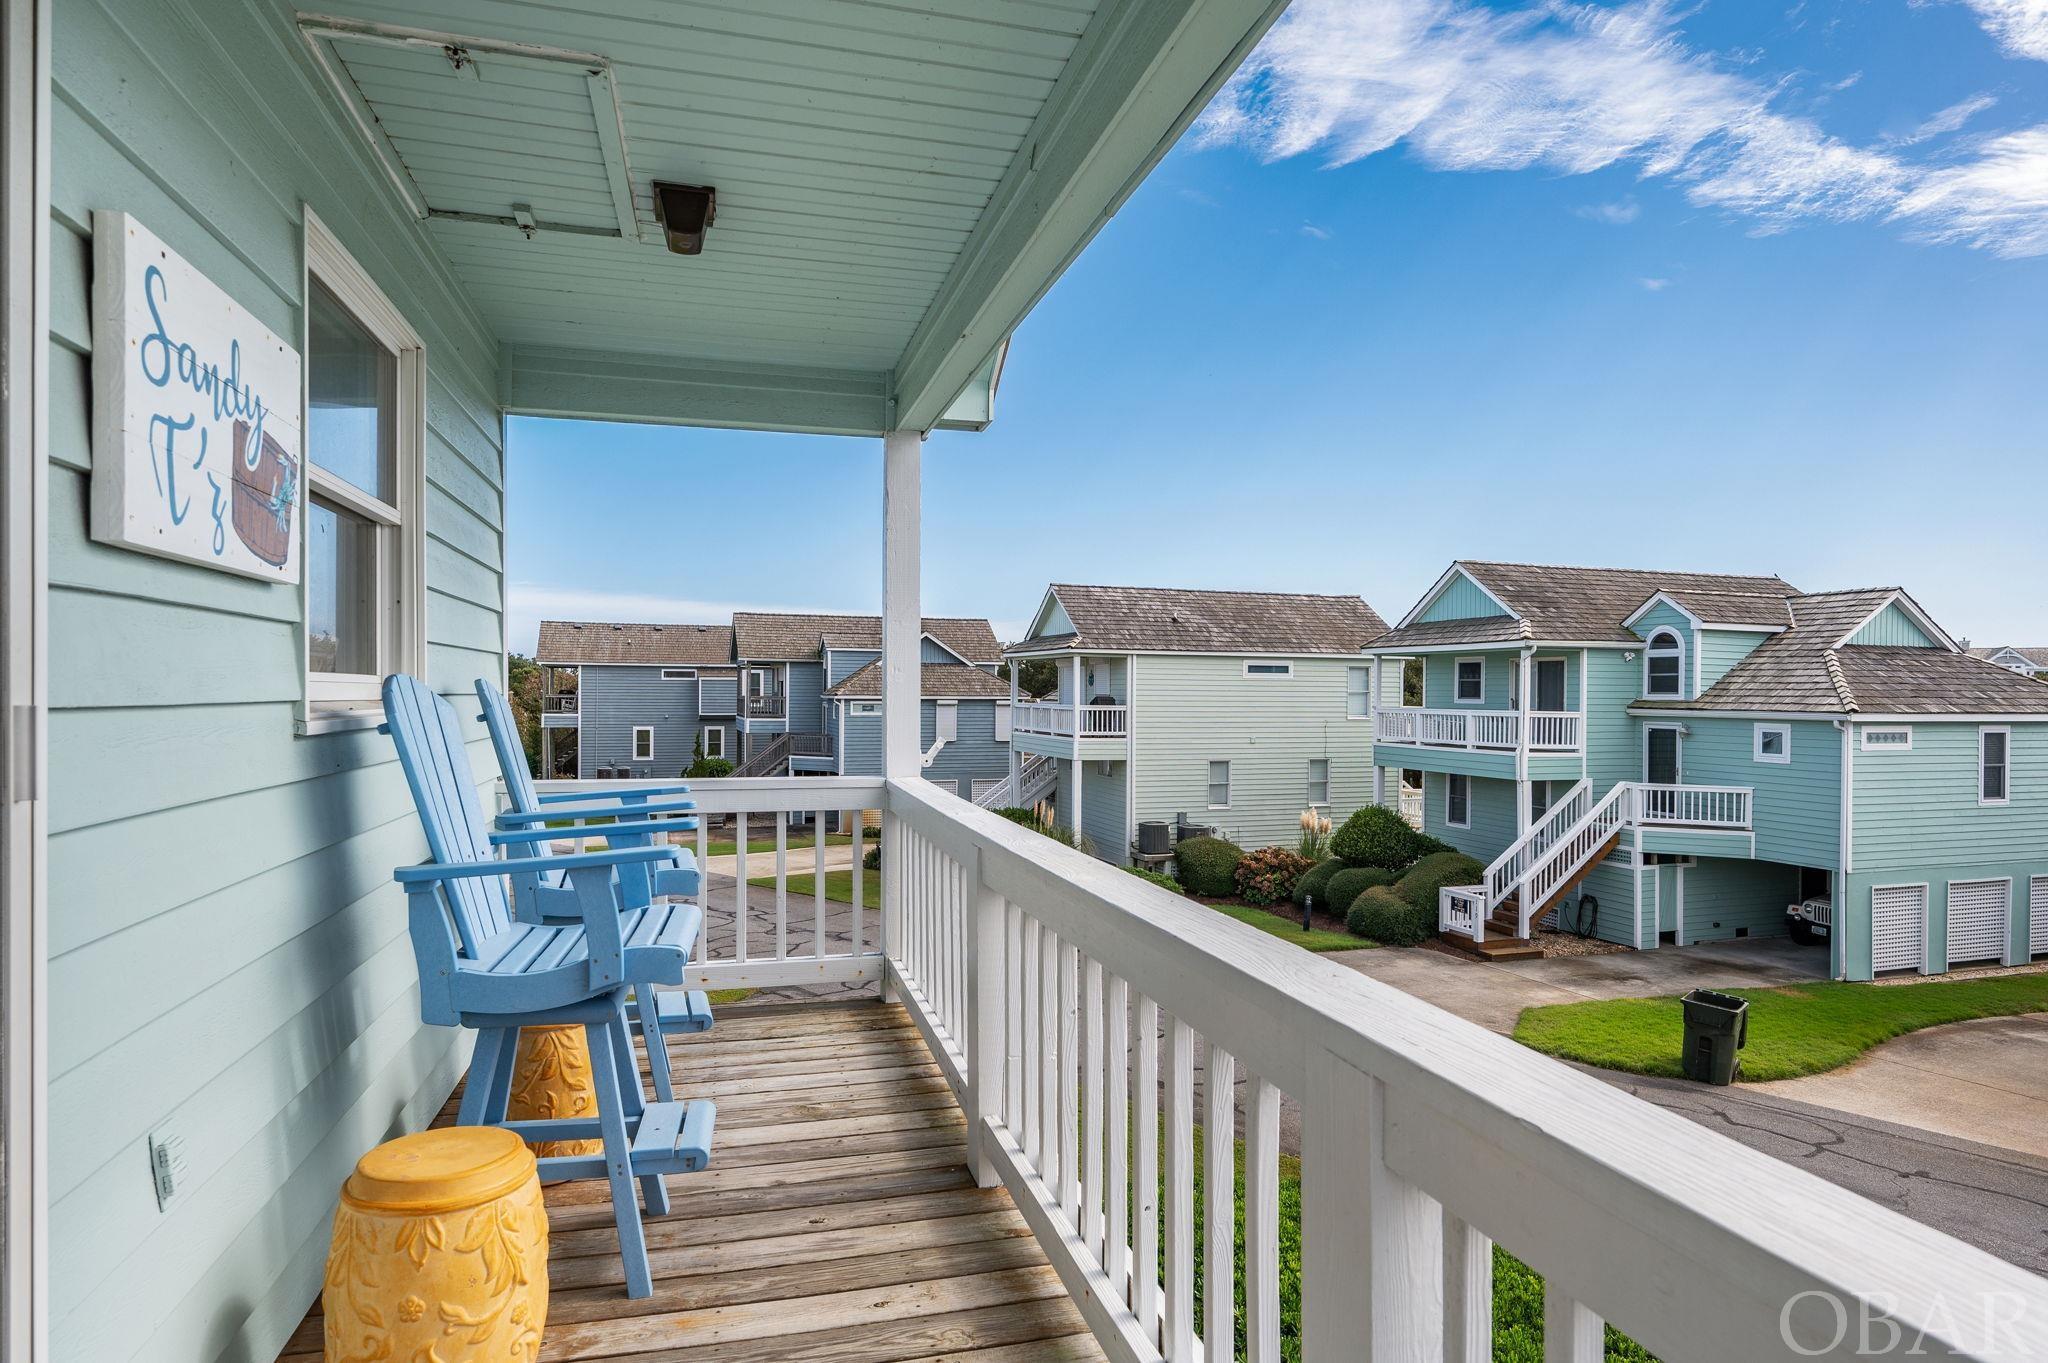 122 Marsh Cove Drive, Nags Head, NC 27959, 3 Bedrooms Bedrooms, ,2 BathroomsBathrooms,Residential,For sale,Marsh Cove Drive,124003